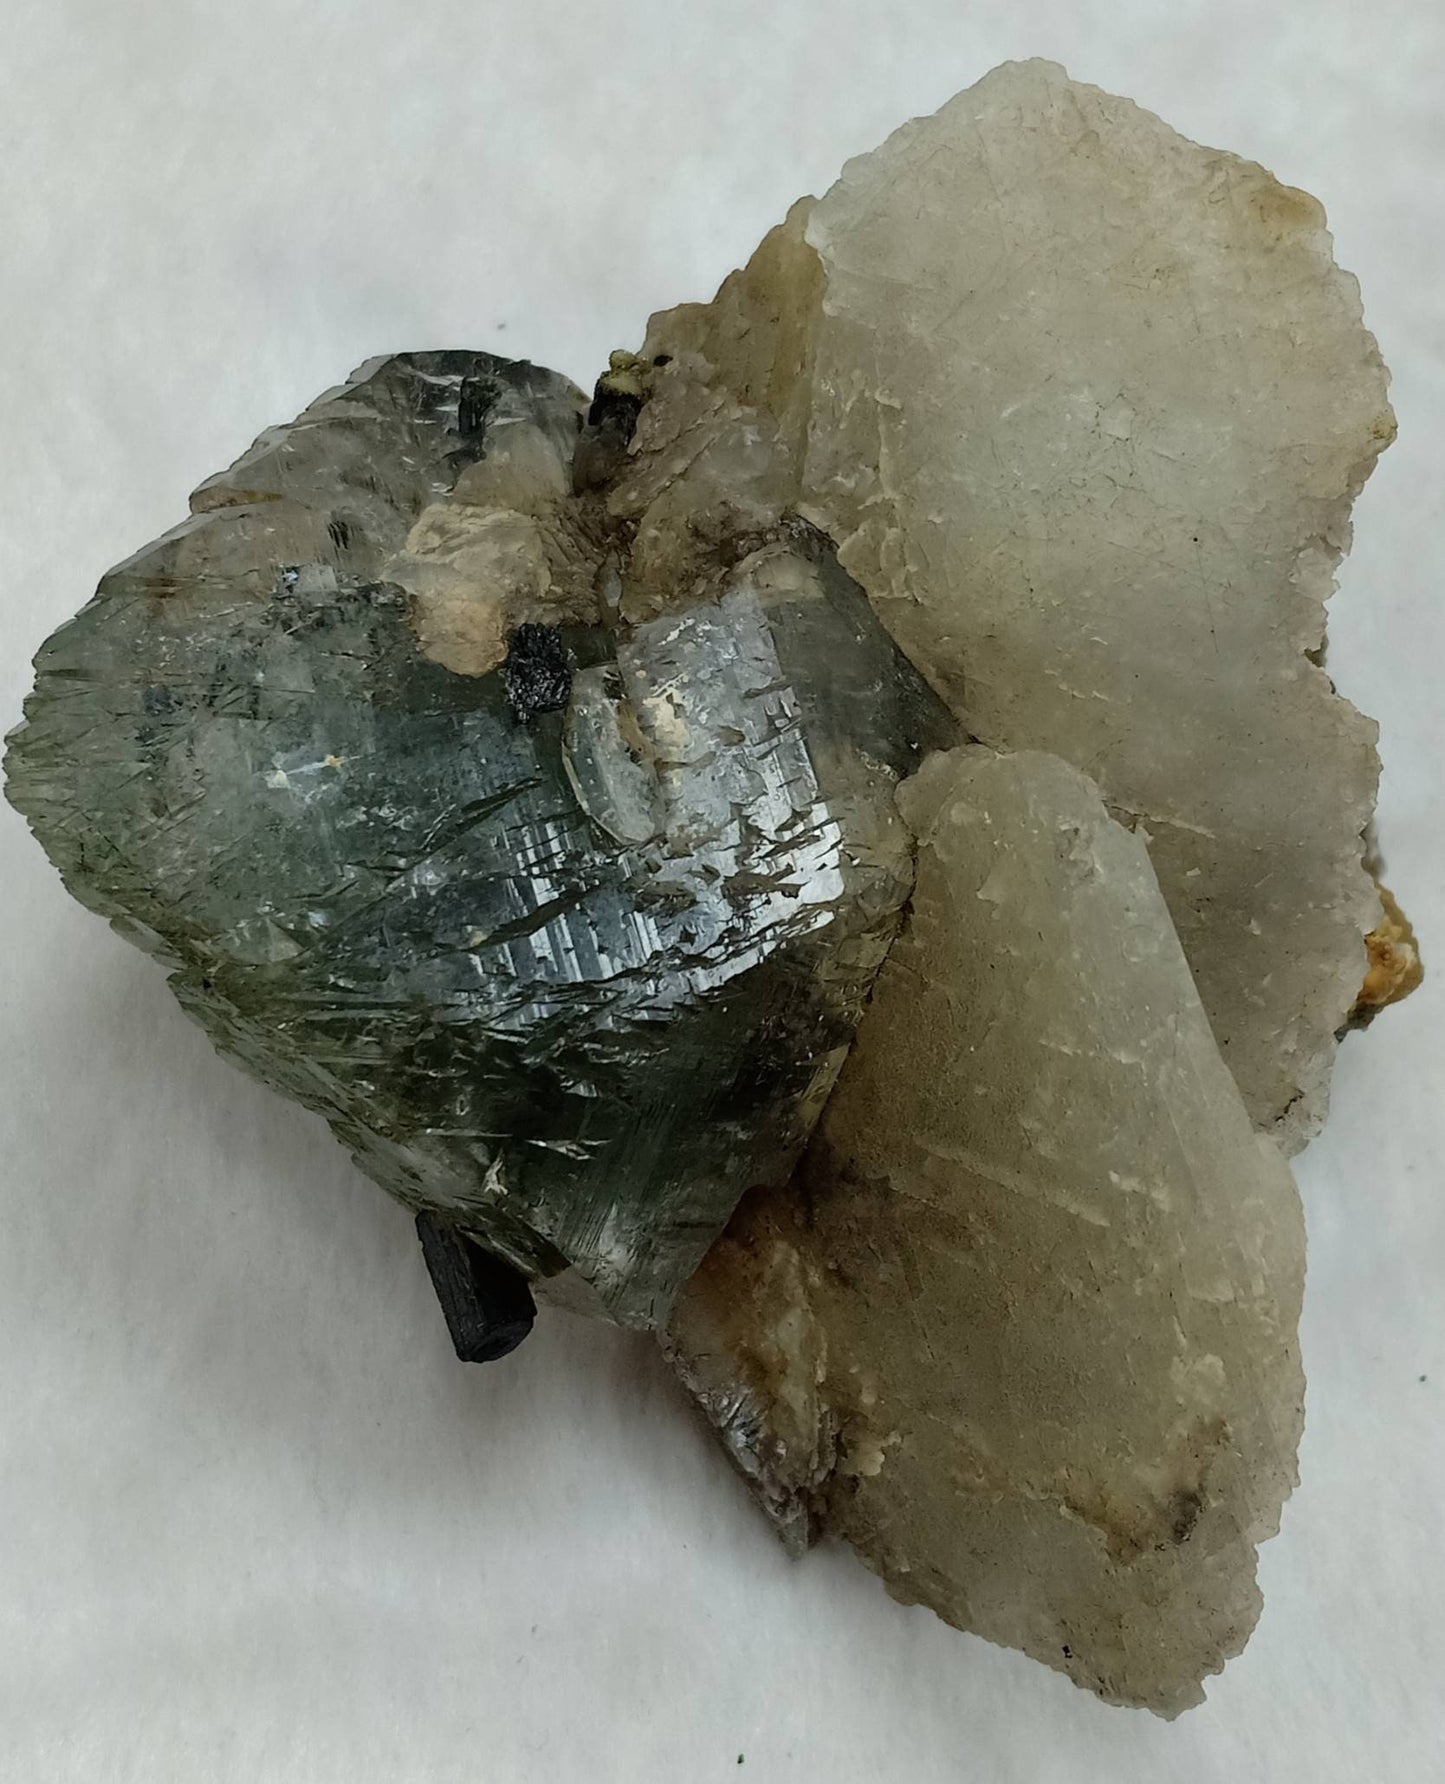 Terminated Etched Quartz crystal with calcite, Epidote and byss-olite 149 grams